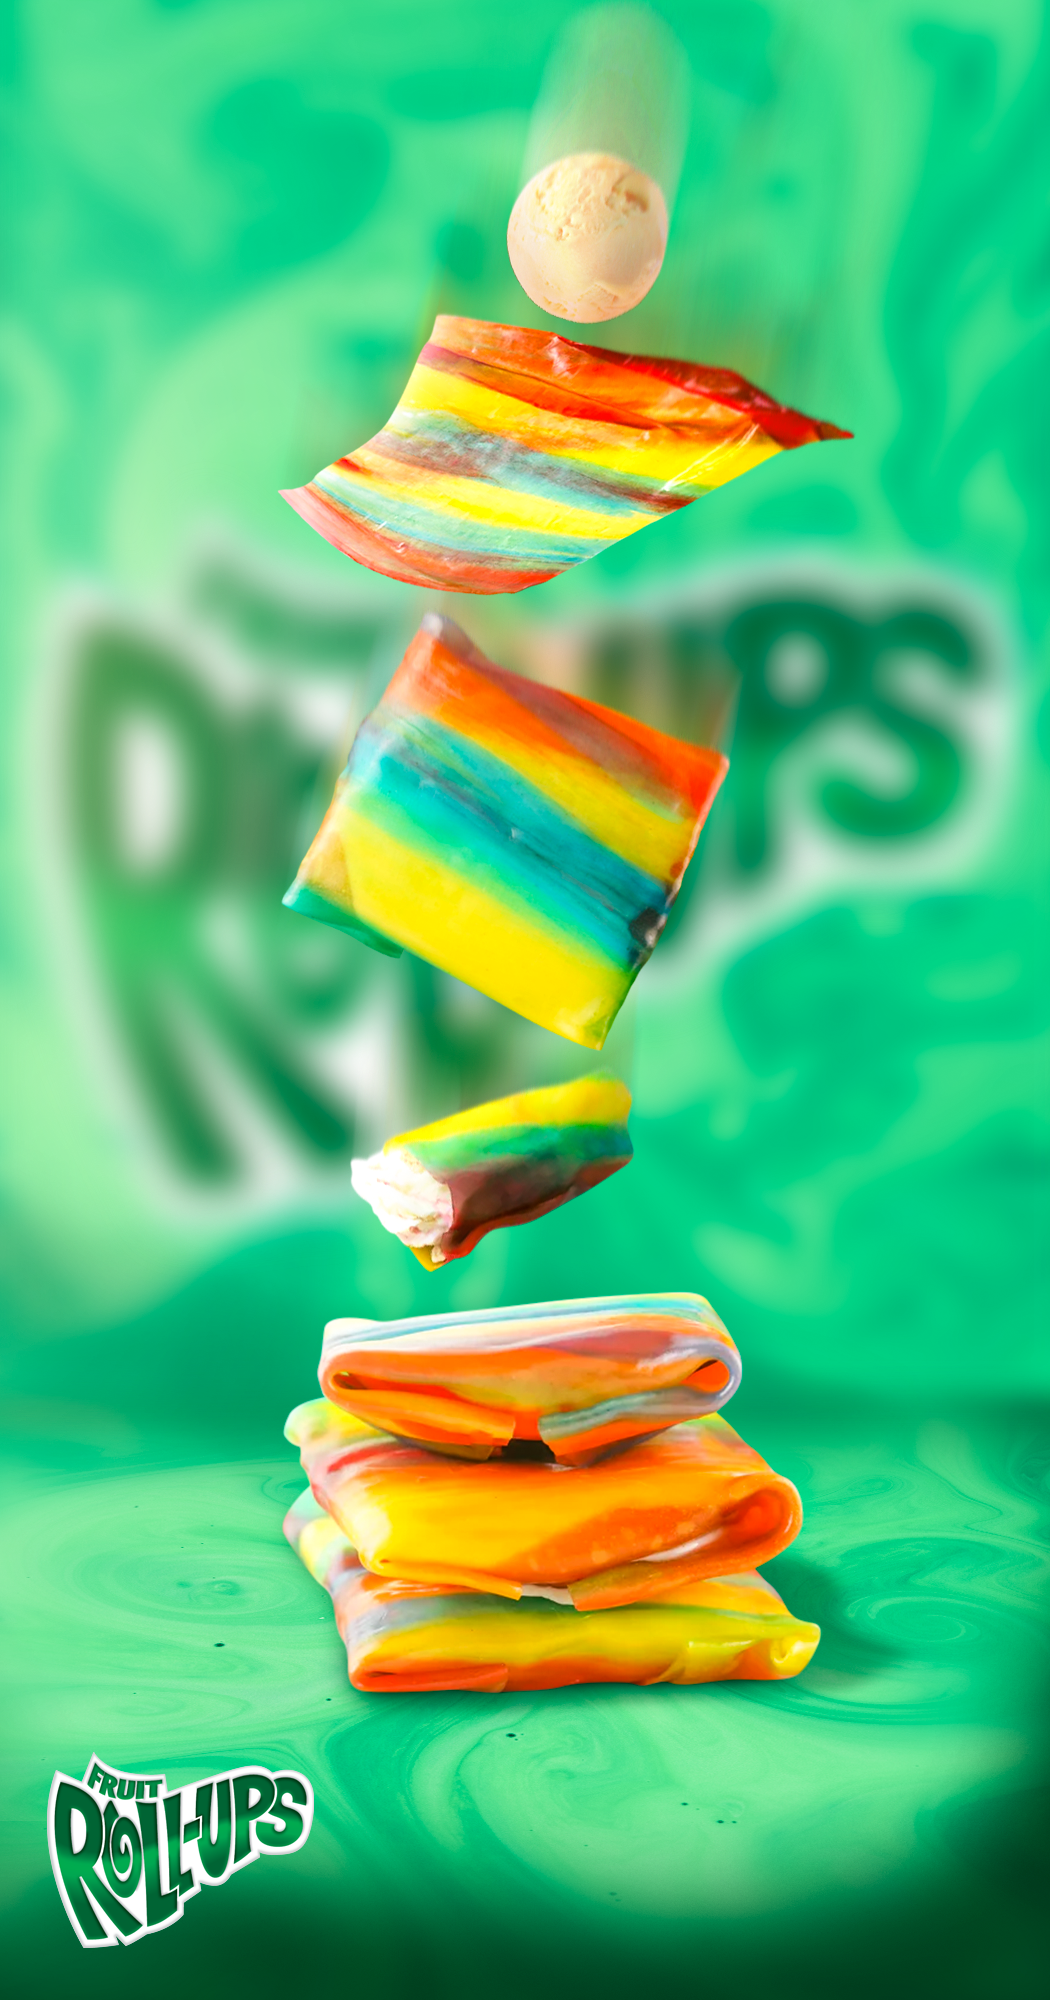 Fruit roll ups in collection mobile banner